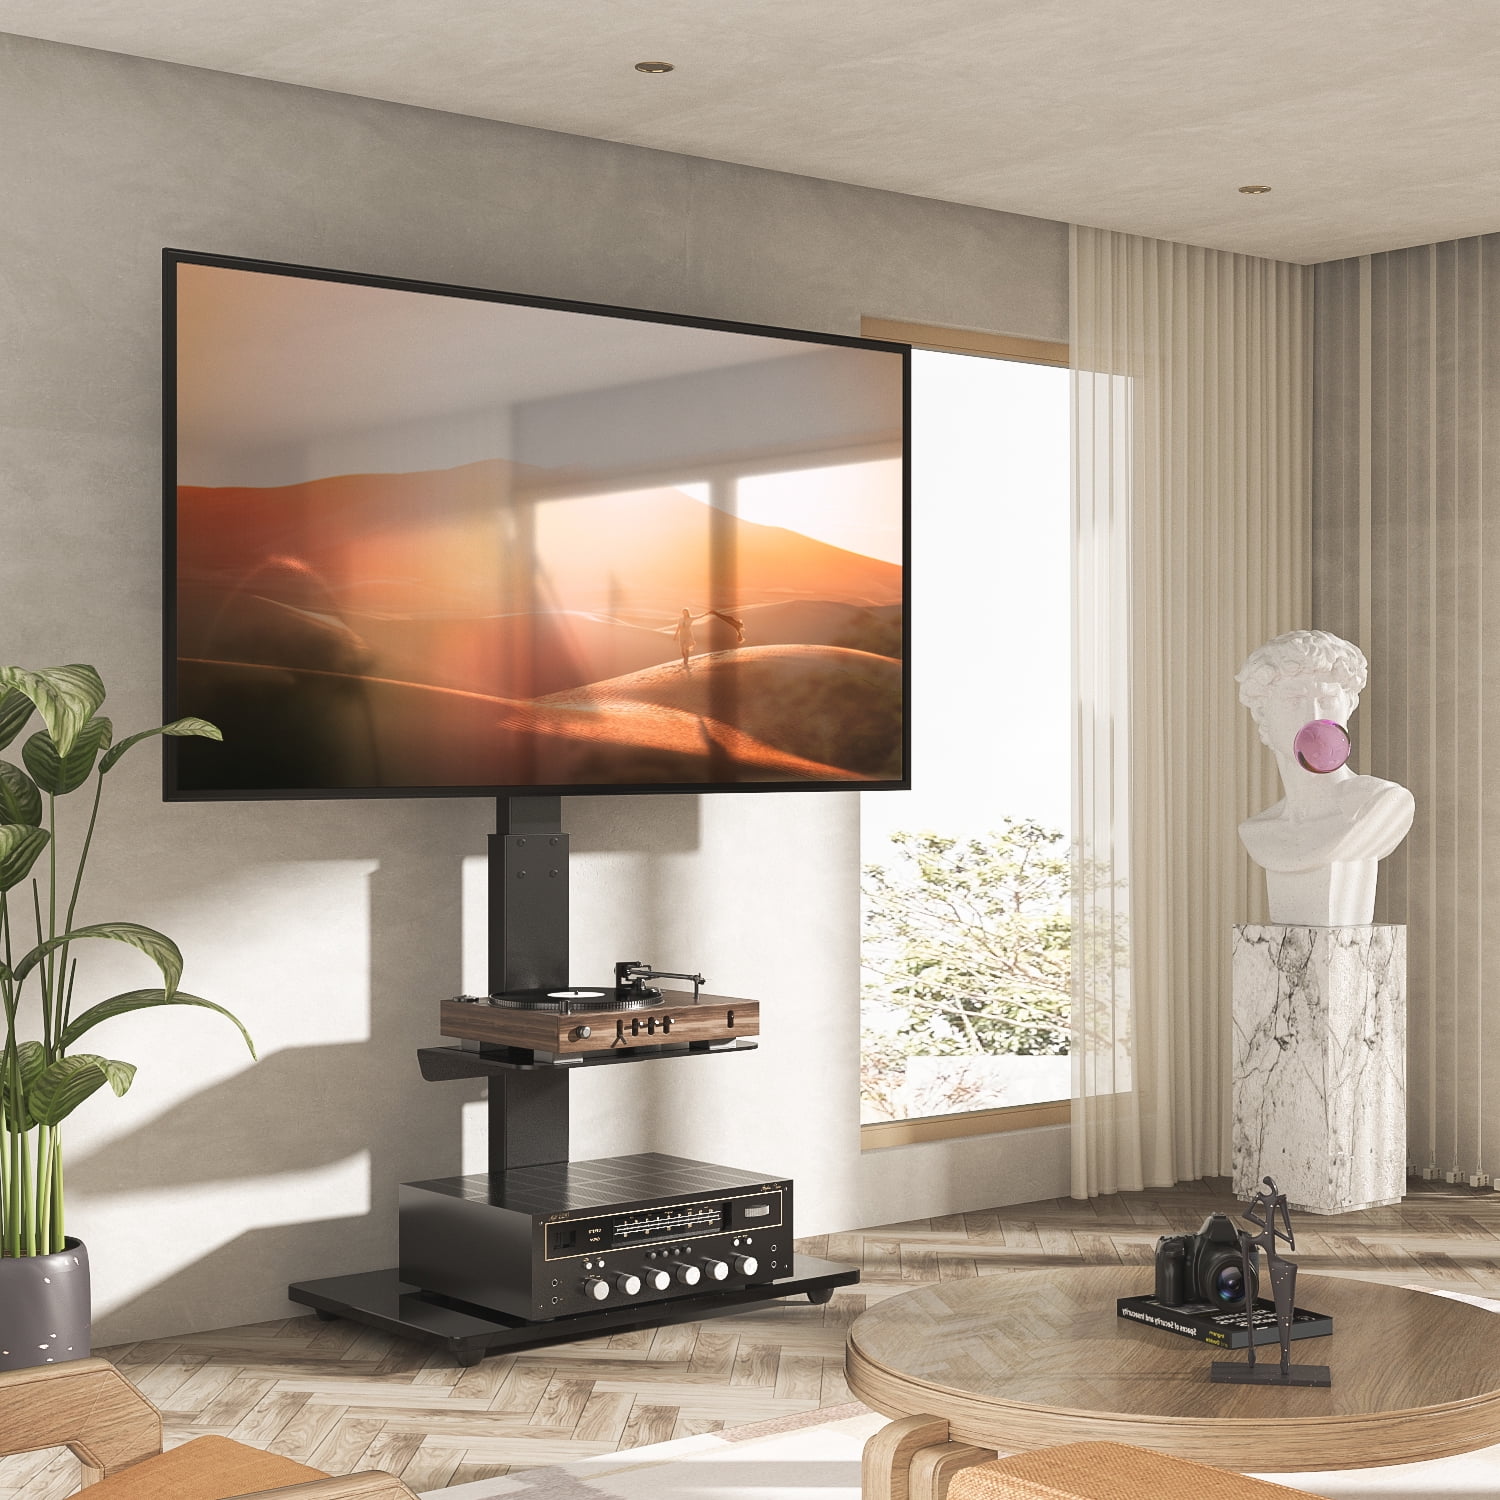 Details about   Swivel Floor TV Stand with Mount for most 32 to 70 inch LCD LED OLED TVs 